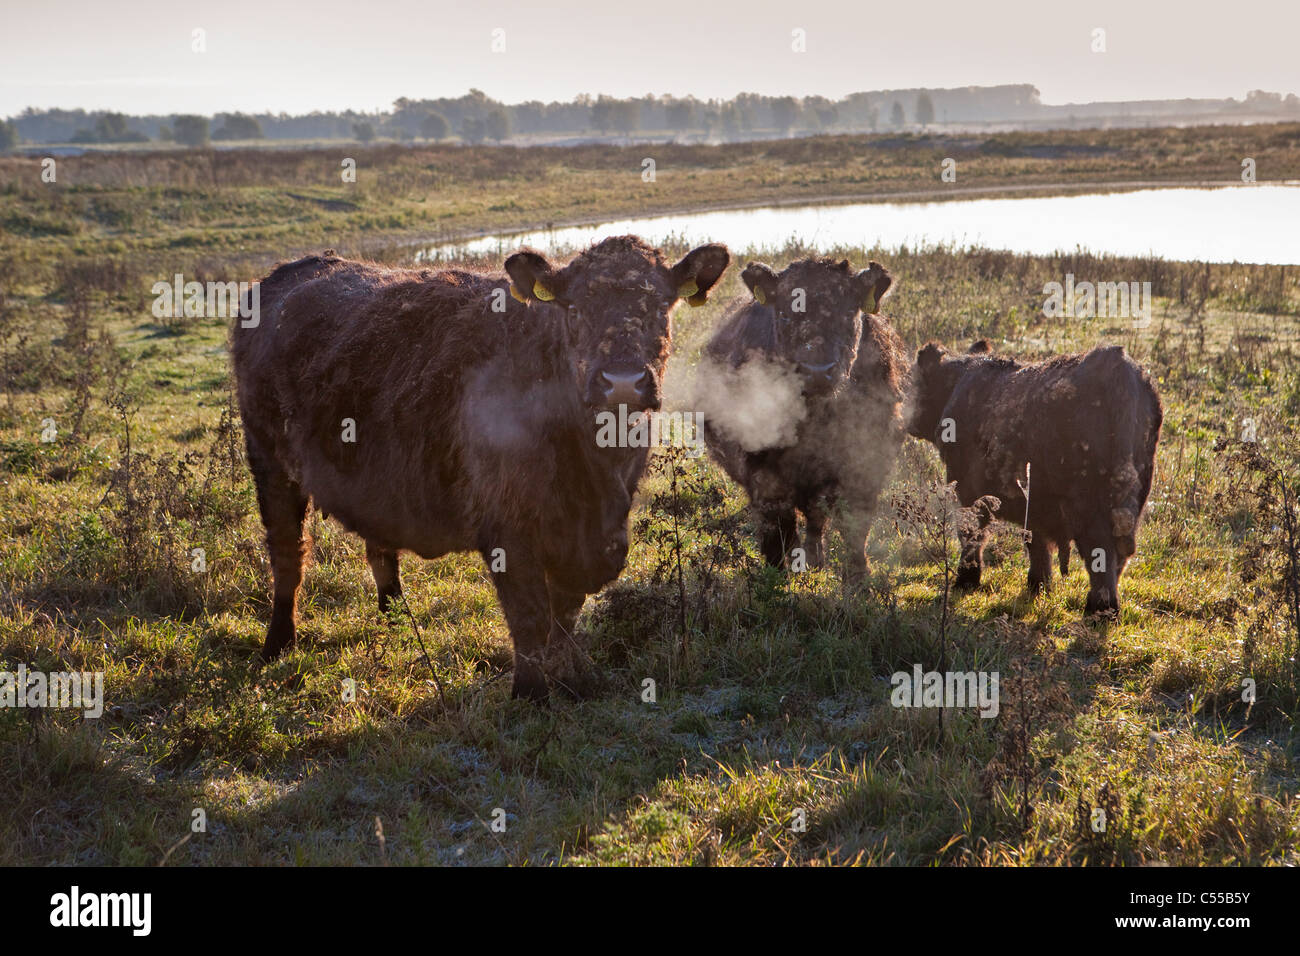 The Netherlands, Ooij, Ooij-polder. Galloway cows. Stock Photo